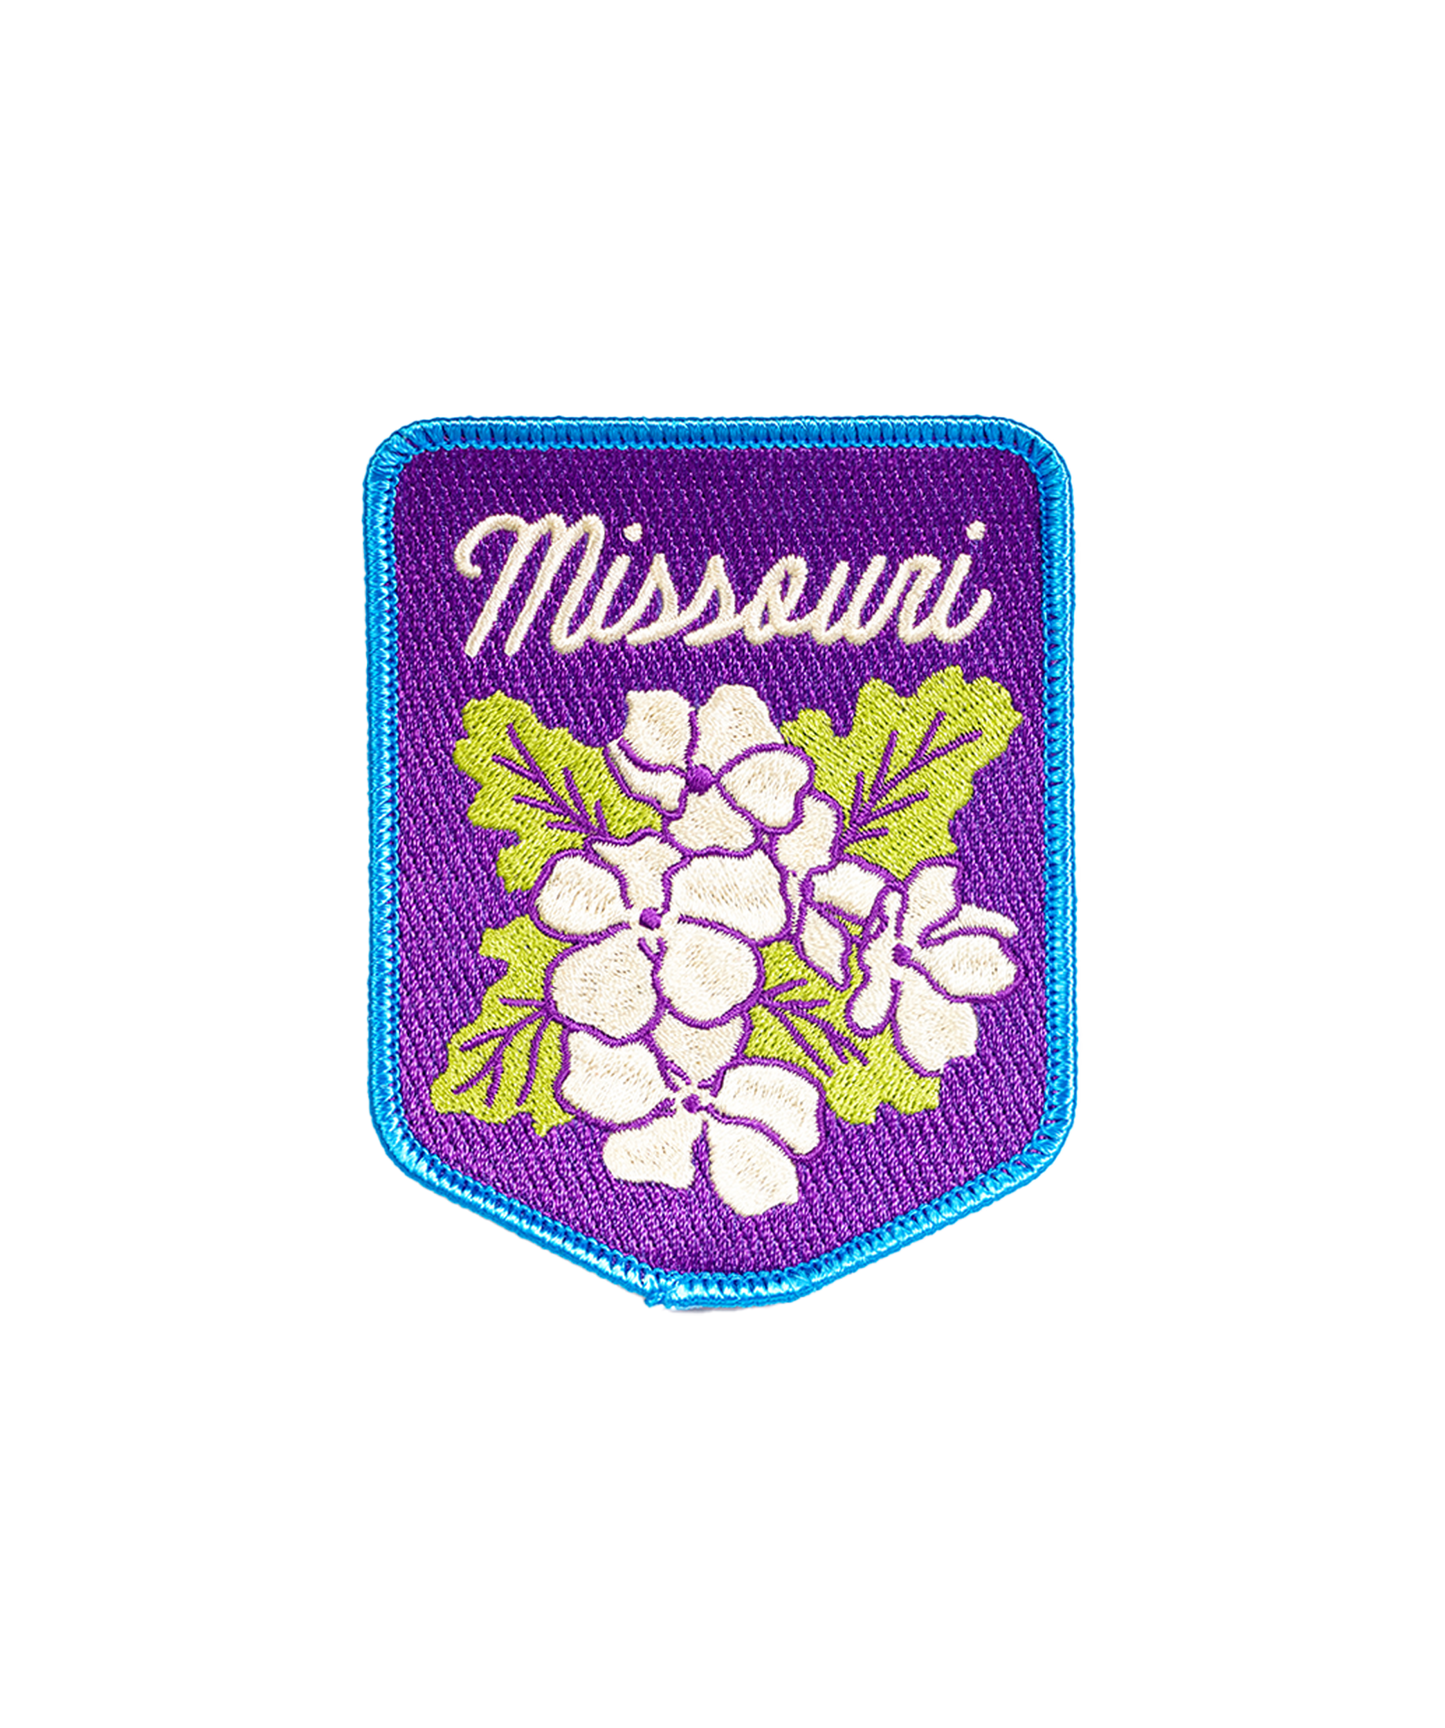 Missouri Embroidered Patch